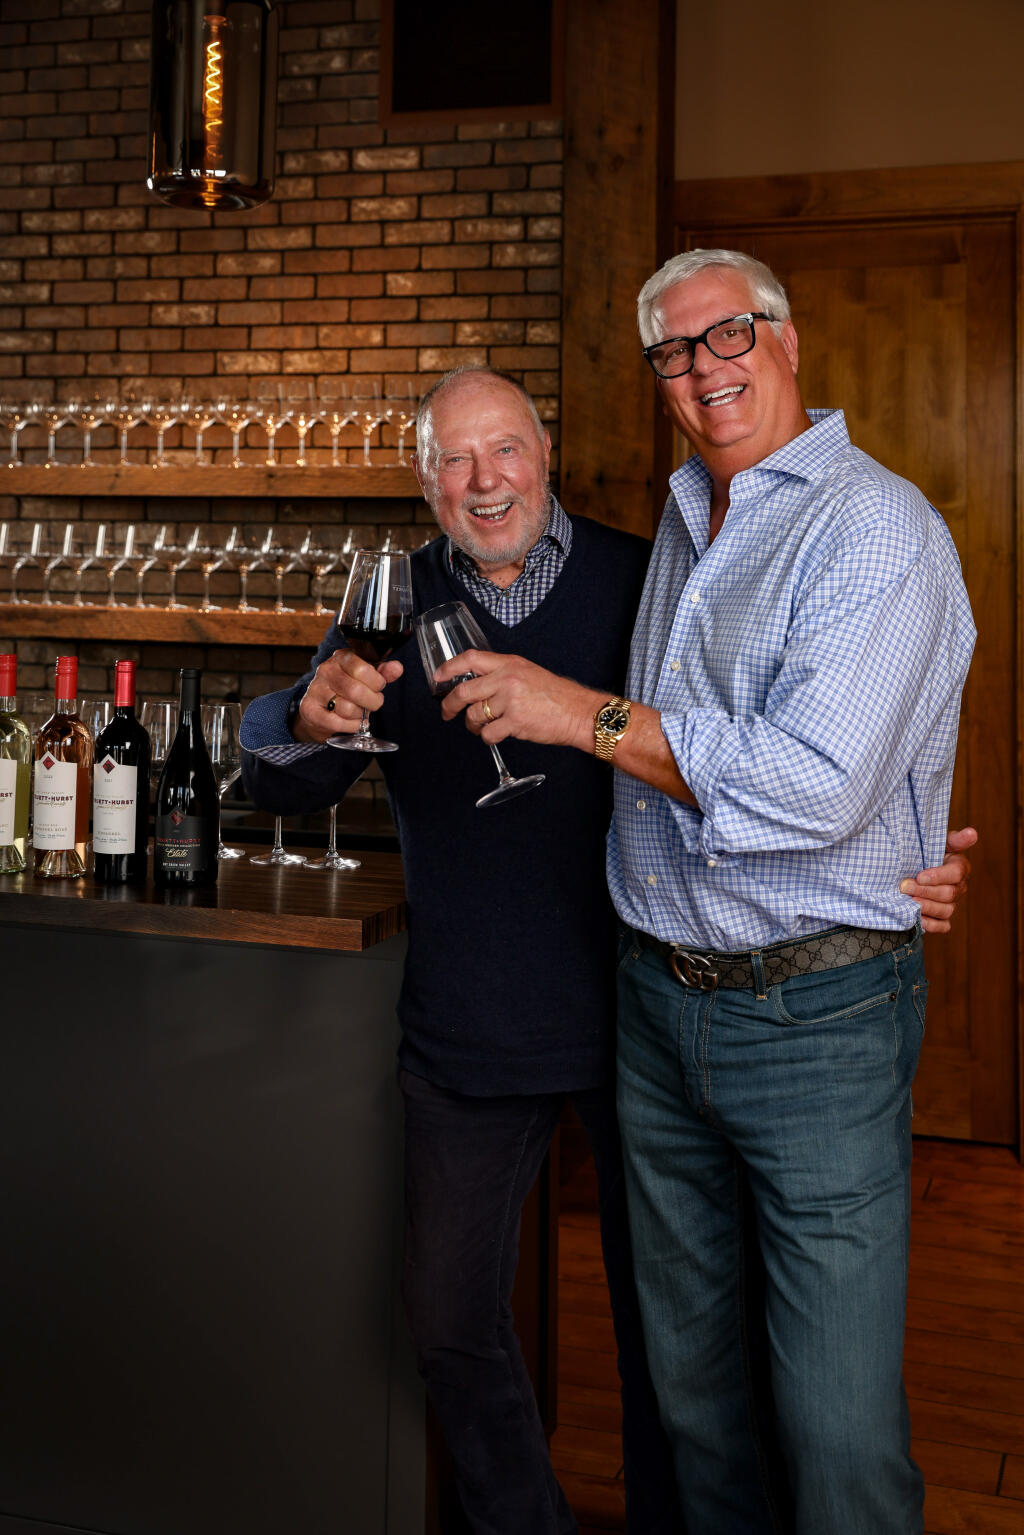 Phil Hurst, right, raises a glass of Truett Hurst wine with Ken Wilson in the tasting room, which is set to open at 113 Mill St. in Healdsburg in early April. (Will Bucquoy Photography)